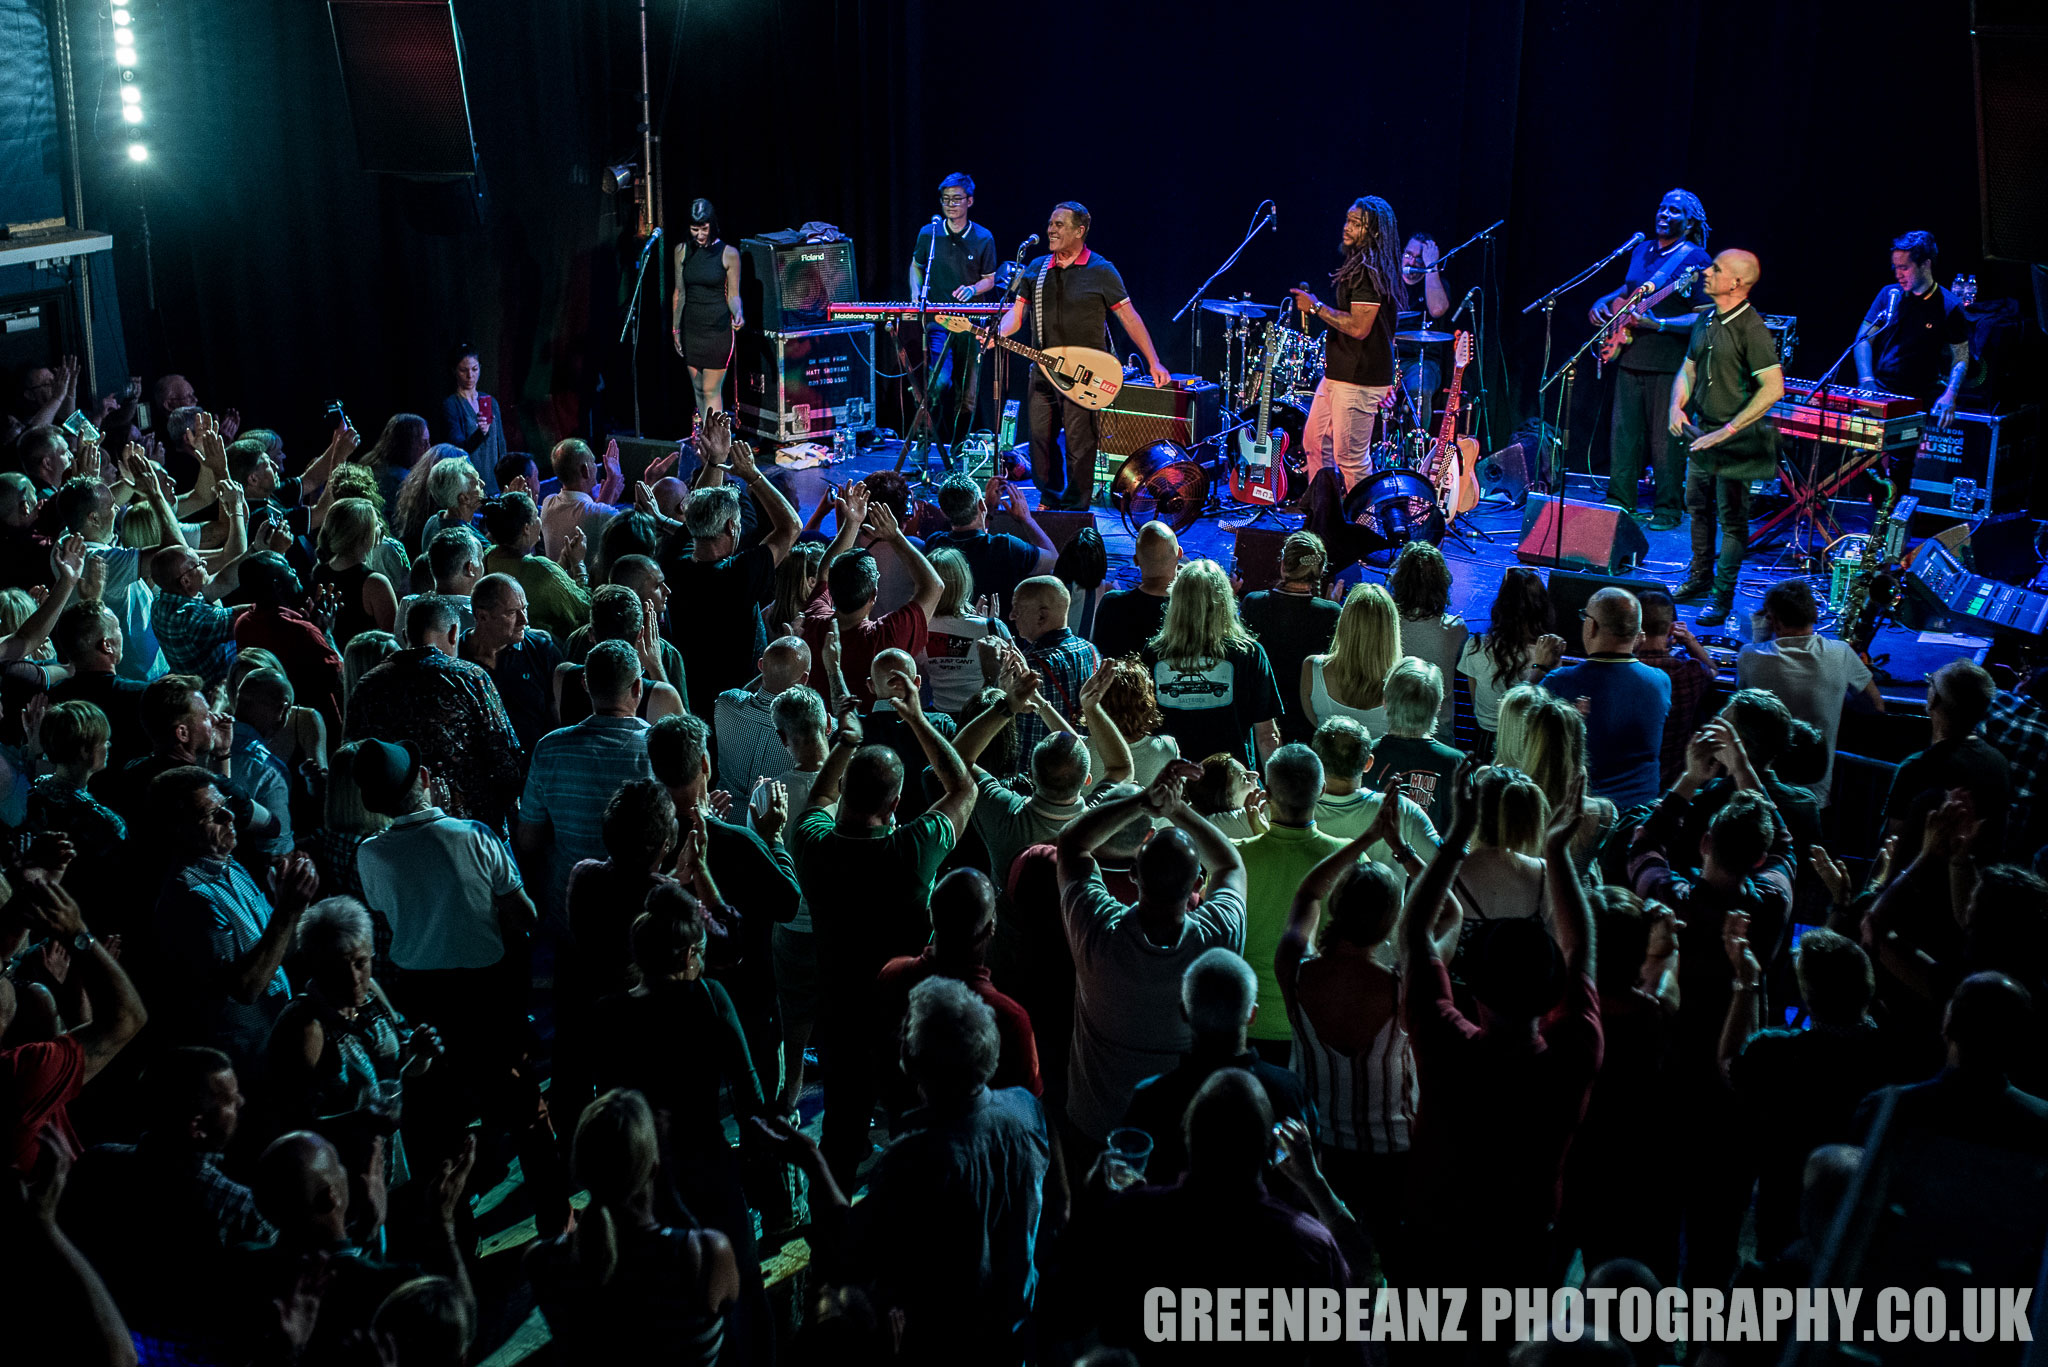 Fans at Exeter Phoenix applaud The Beat featuring Dave Wakeling in 2018